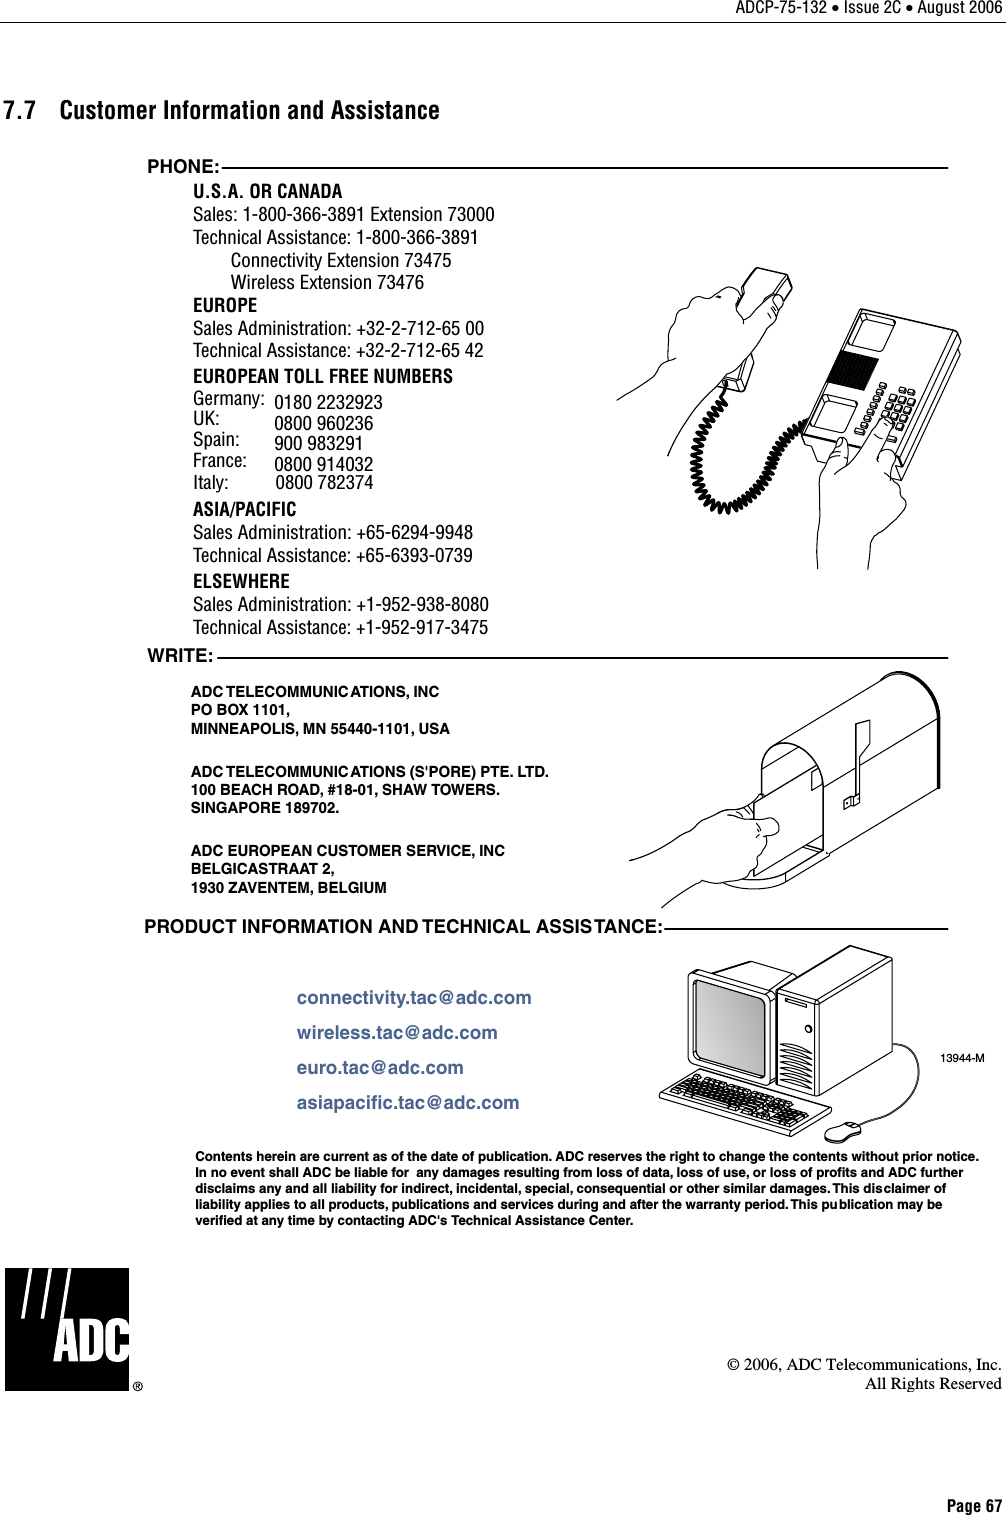 ADCP-75-132 • Issue 2C • August 2006 Page 67 7.7  Customer Information and Assistance 13944-MWRITE:ADC TELECOMMUNICATIONS,  INCPO BOX 1101,MINNEAPOLIS, MN 55440-1101, USAADC TELECOMMUNIC ATIONS (S&apos;PORE) PTE. LTD.100 BEACH ROAD, #18-01, SHAW TOWERS.SINGAPORE 189702.ADC EUROPEAN CUSTOMER SERVICE, INCBELGICASTRAAT 2,1930 ZAVENTEM, BELGIUMPHONE:EUROPESales Administration: +32-2-712-65 00Technical Assistance: +32-2-712-65 42EUROPEAN TOLL FREE NUMBERSUK: 0800 960236Spain: 900 983291France: 0800 914032Germany: 0180 2232923U.S.A. OR CANADASales: 1-800-366-3891 Extension 73000Technical Assistance: 1-800-366-3891        Connectivity Extension 73475        Wireless Extension 73476ASIA/PACIFICSales Administration: +65-6294-9948Technical Assistance: +65-6393-0739ELSEWHERESales Administration: +1-952-938-8080Technical Assistance: +1-952-917-3475Italy:          0800 782374PRODUCT INFORMATION AND TECHNICAL ASSISTANCE:Contents herein are current as of the date of publication. ADC reserves the right to change the contents without prior notice.In no event shall ADC be liable for  any damages resulting from loss of data, loss of use, or loss of profits and ADC furtherdisclaims any and all liability for indirect, incidental, special, consequential or other similar damages. This disclaimer ofliability applies to all products, publications and services during and after the warranty period. This pu blication may beverified at any time by contacting ADC&apos;s Technical Assistance Center. euro.tac@adc.comasiapacific.tac@adc.comwireless.tac@adc.comconnectivity.tac@adc.com  © 2006, ADC Telecommunications, Inc.All Rights Reserved 